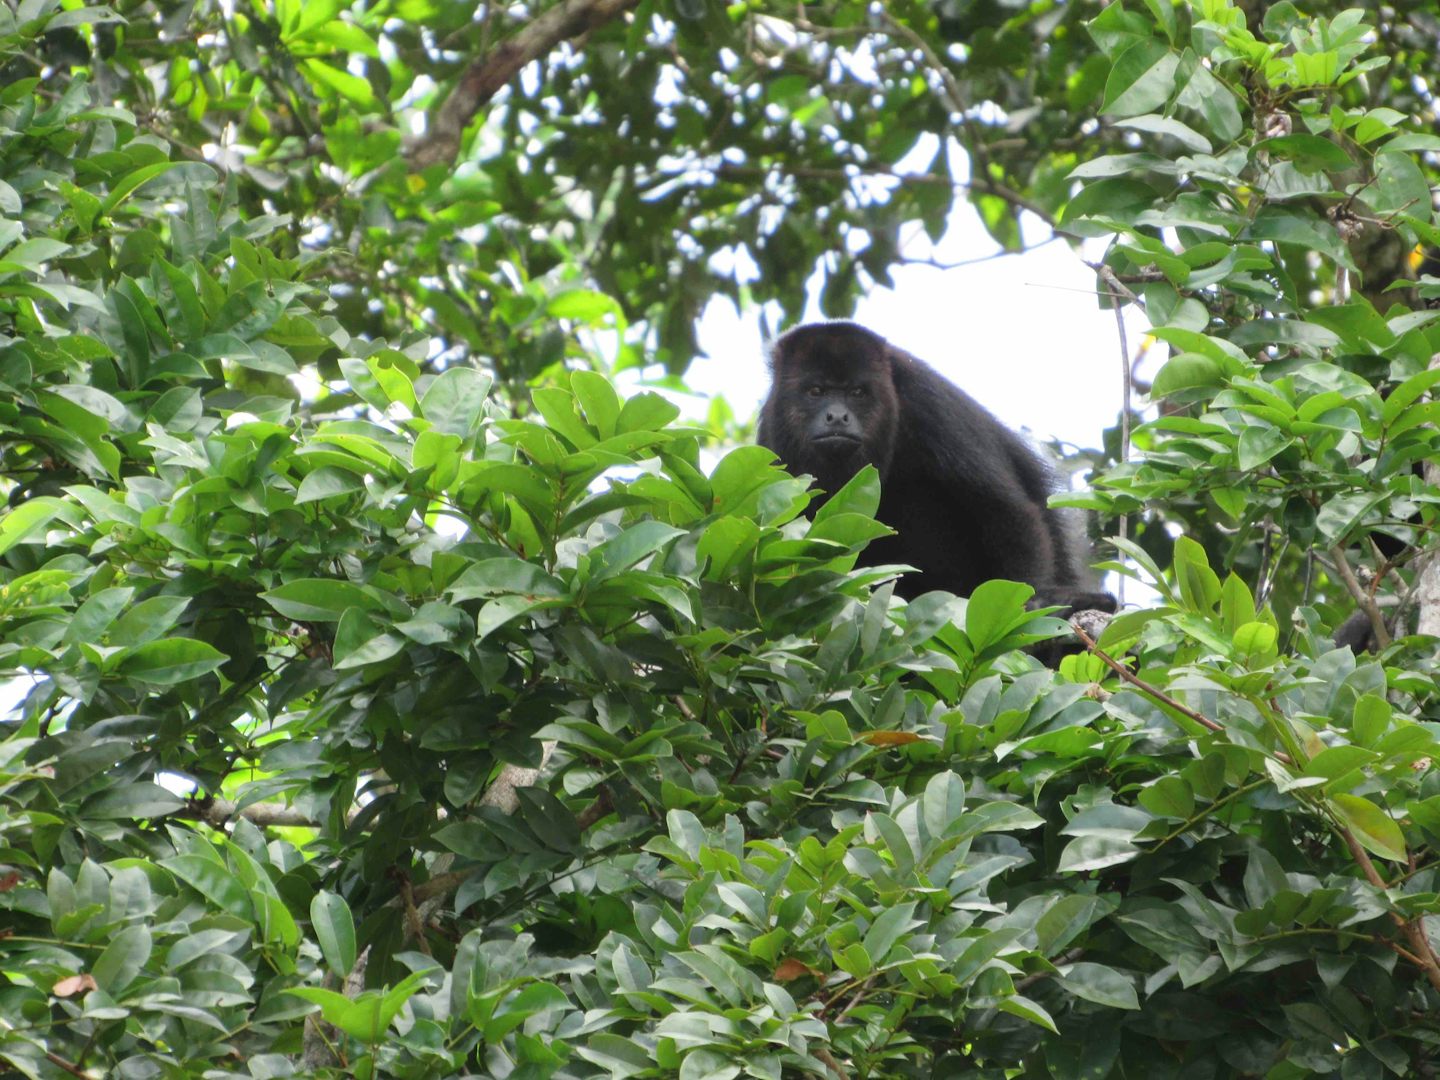 Spotted a howler monkey in the trees above our river boat in Belize on the way to Altun Ha.